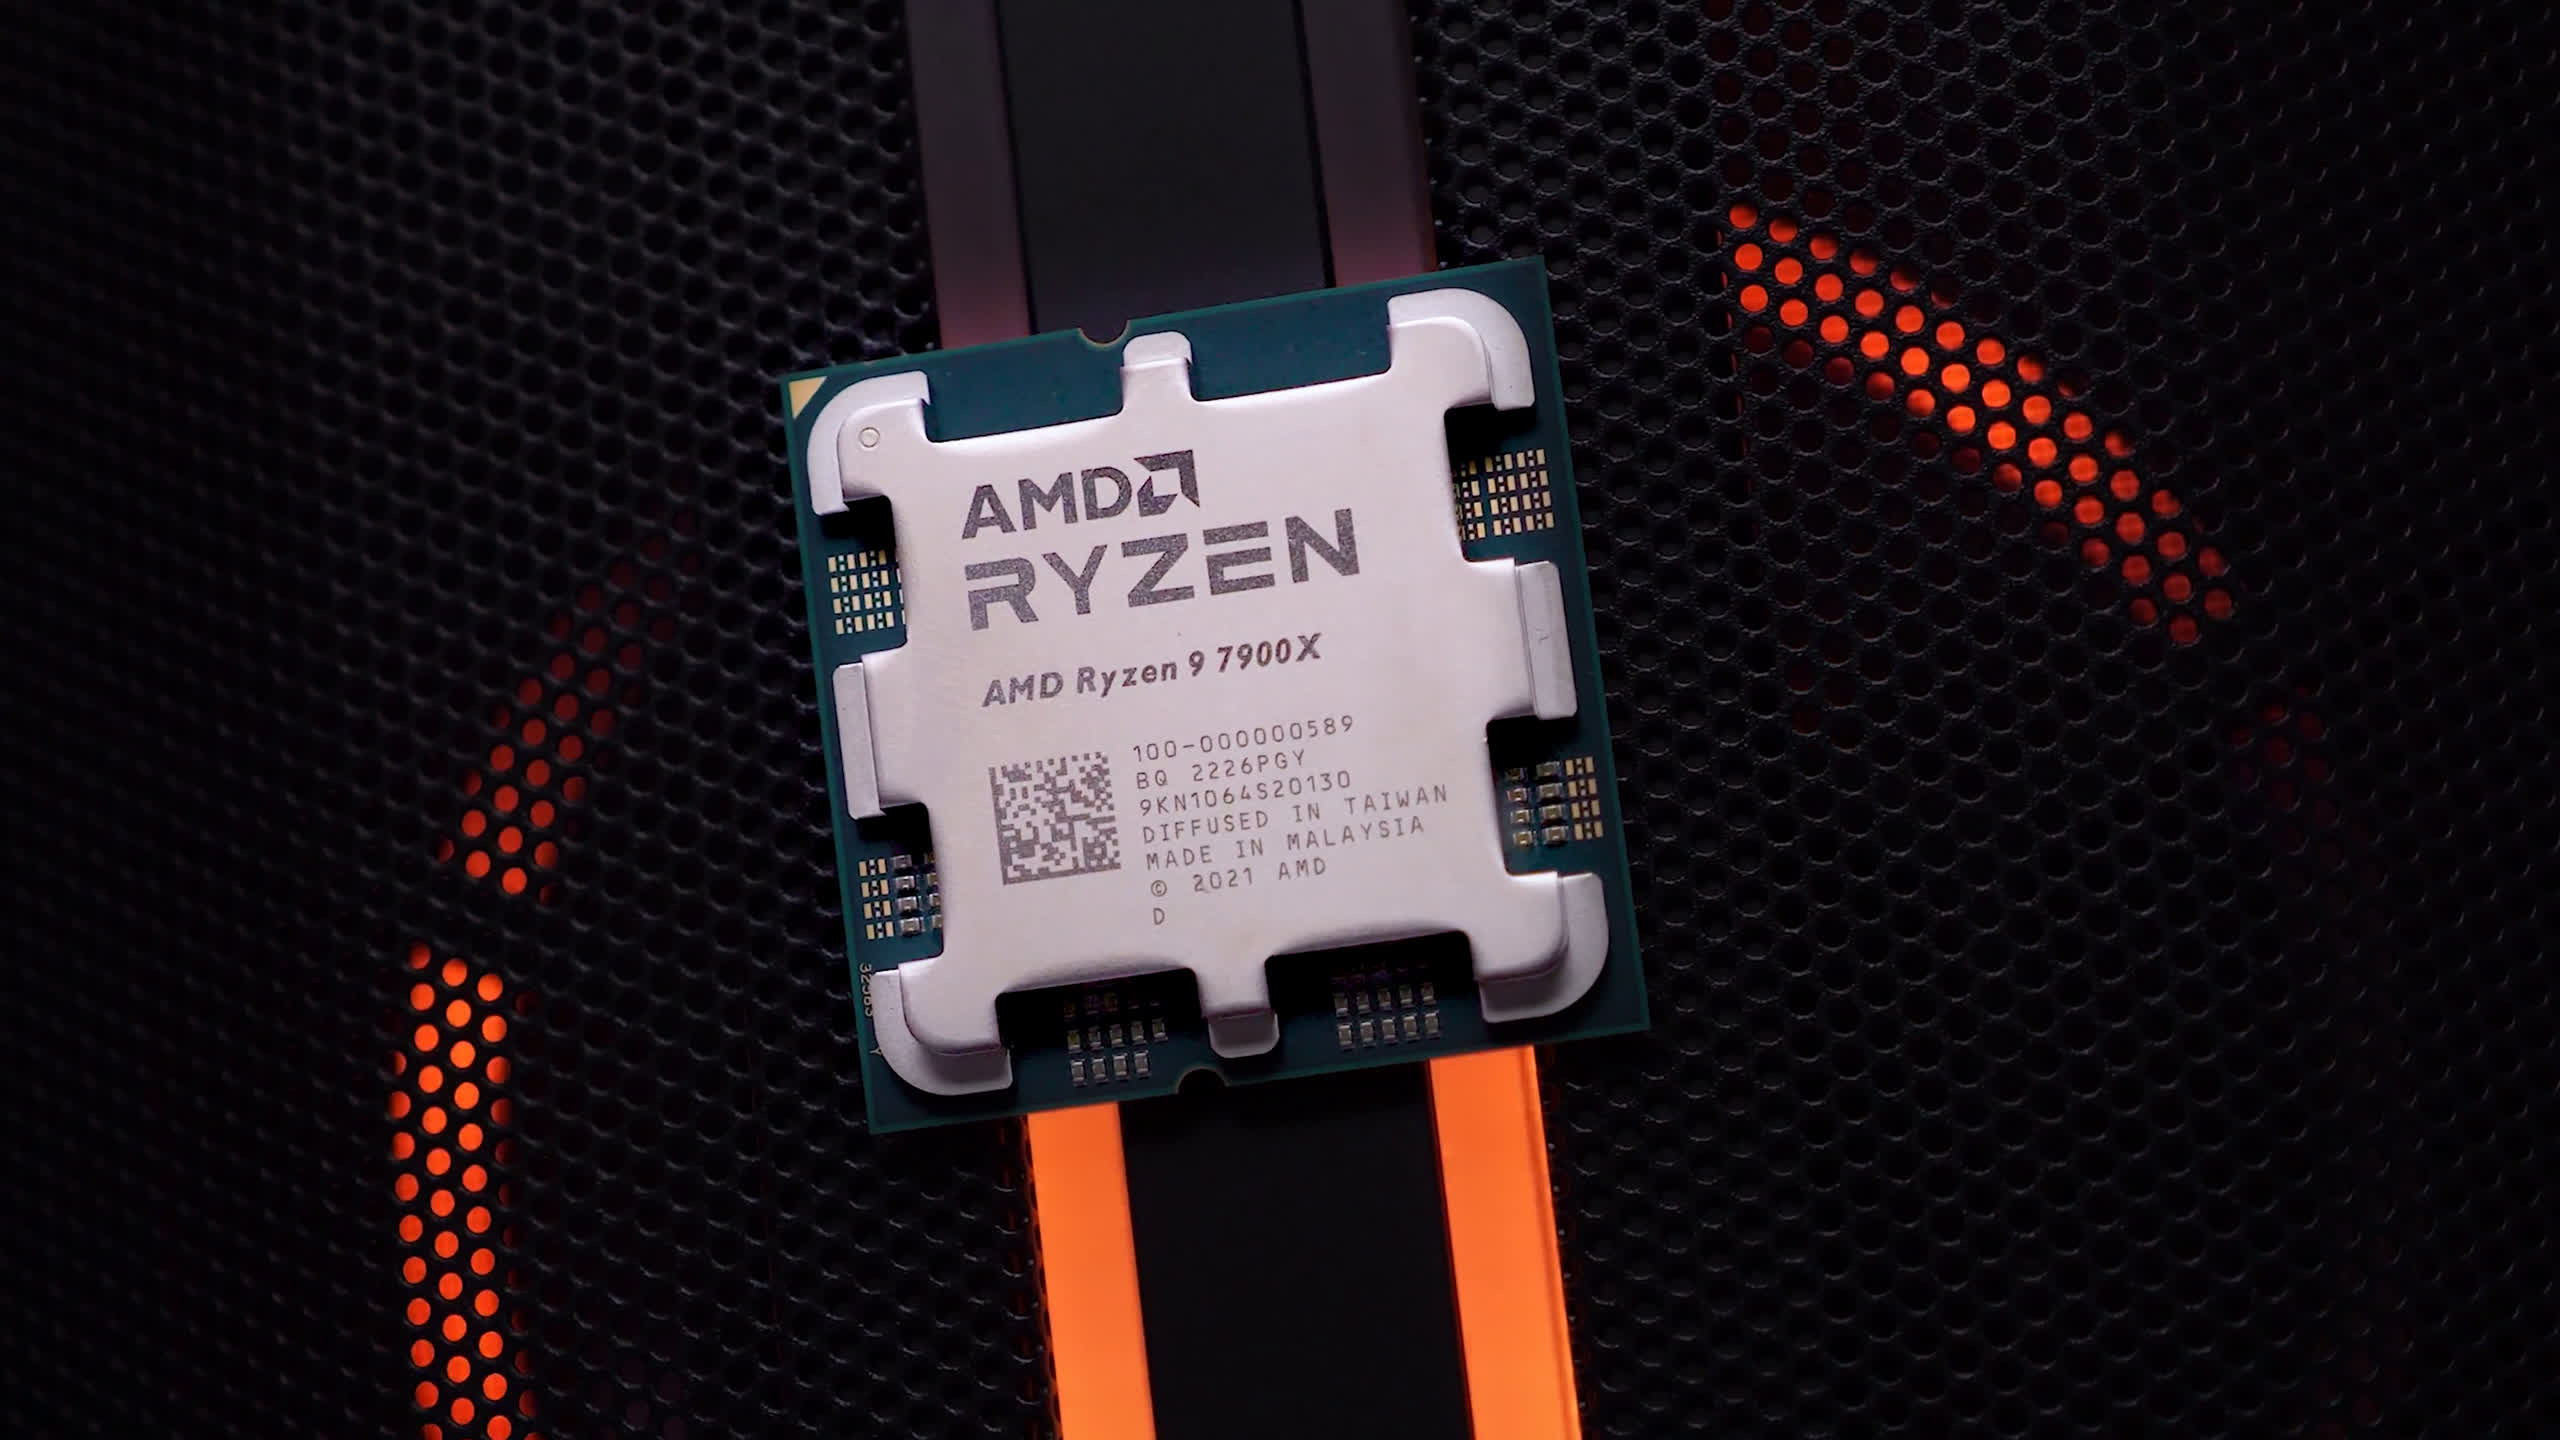 Zen 4 CPU prices fall dramatically, Ryzen 9 7950X is now down to $554